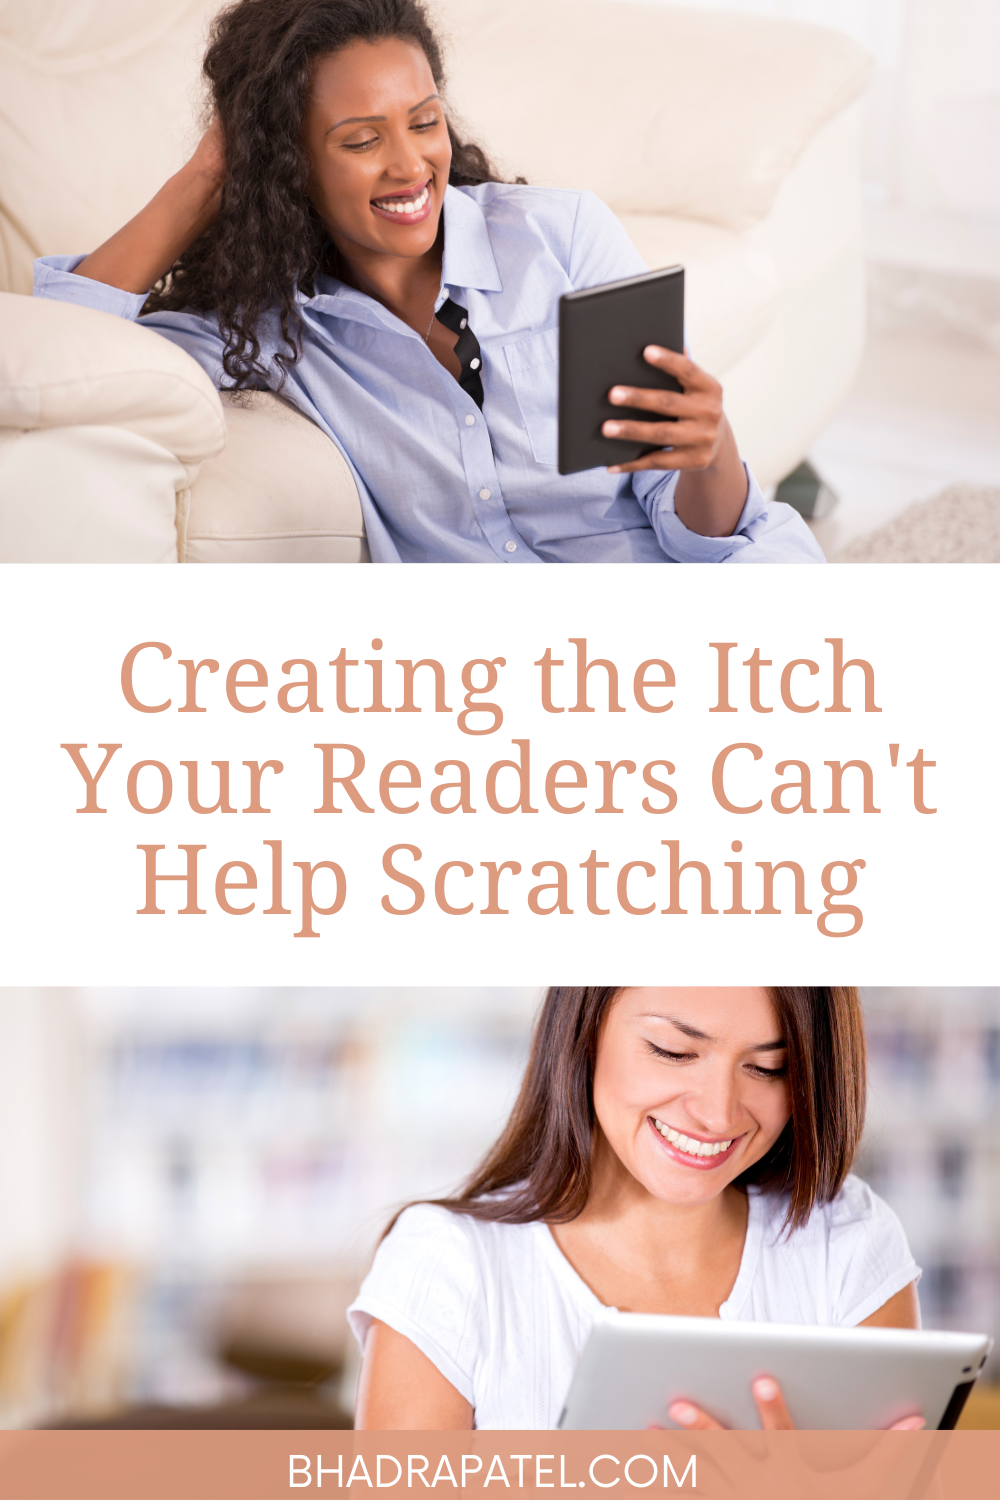 Creating the Itch Your Readers Can’t Help Scratching